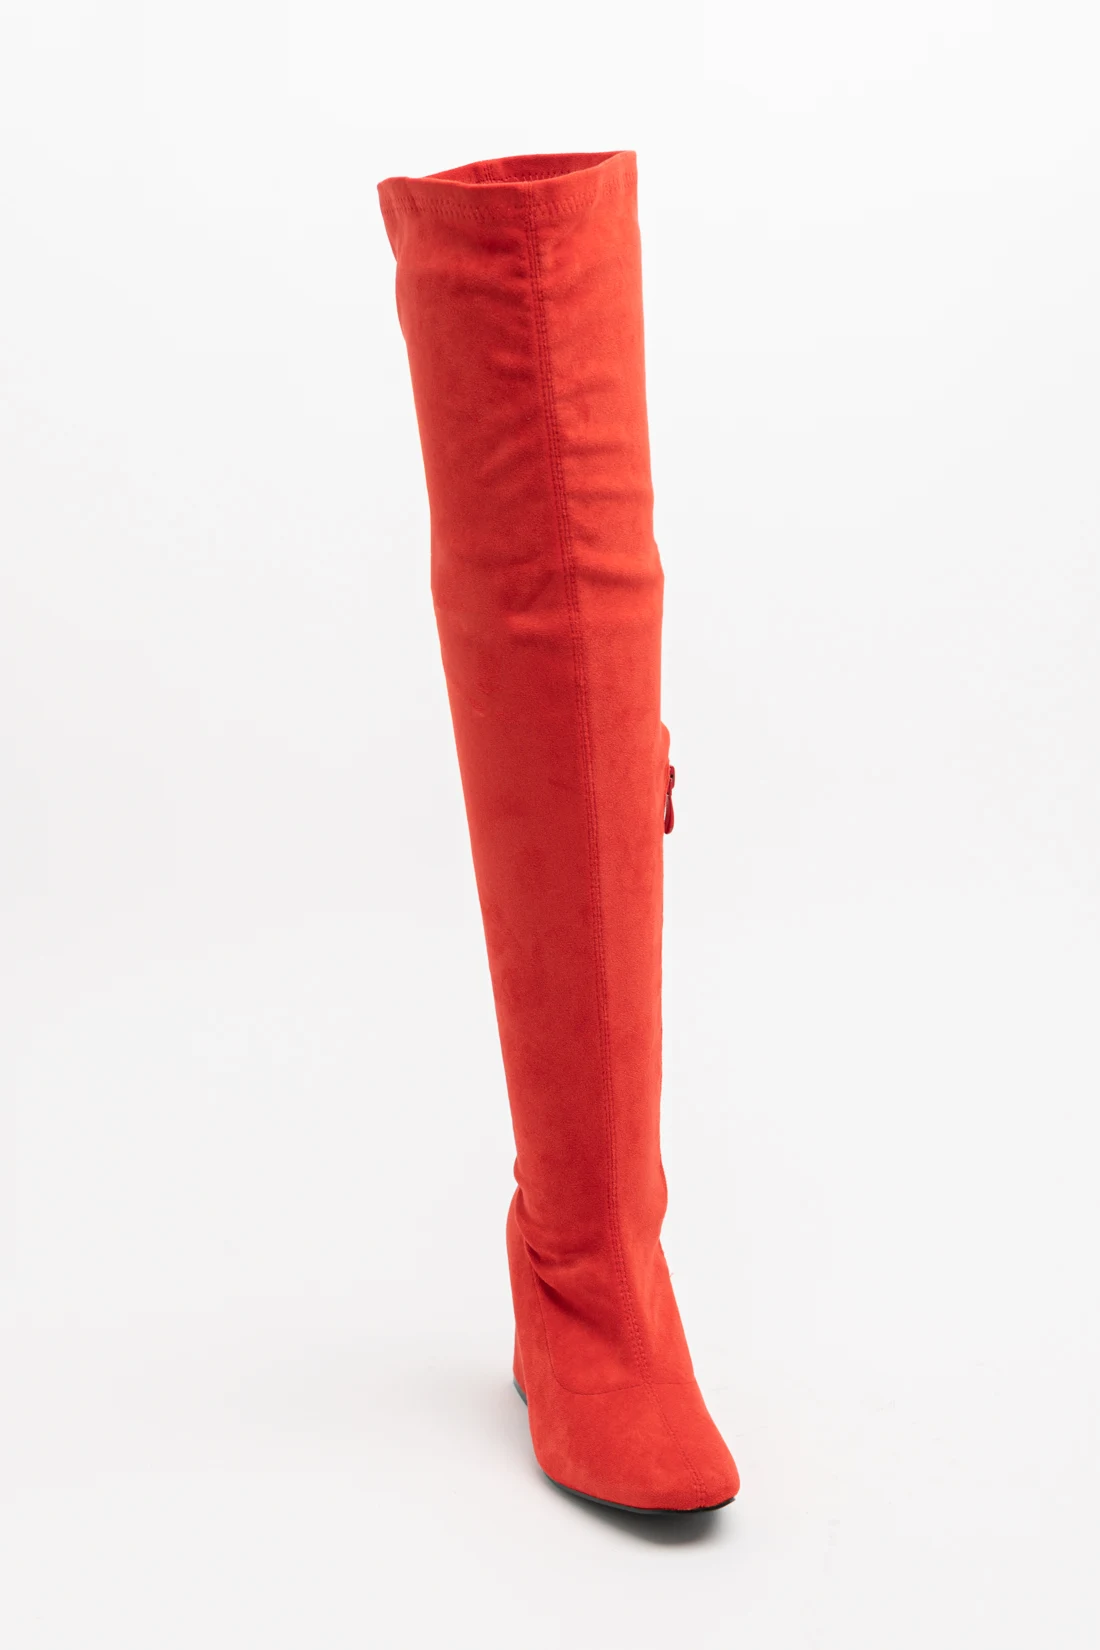 ROSANE HIGH BOOT - RED